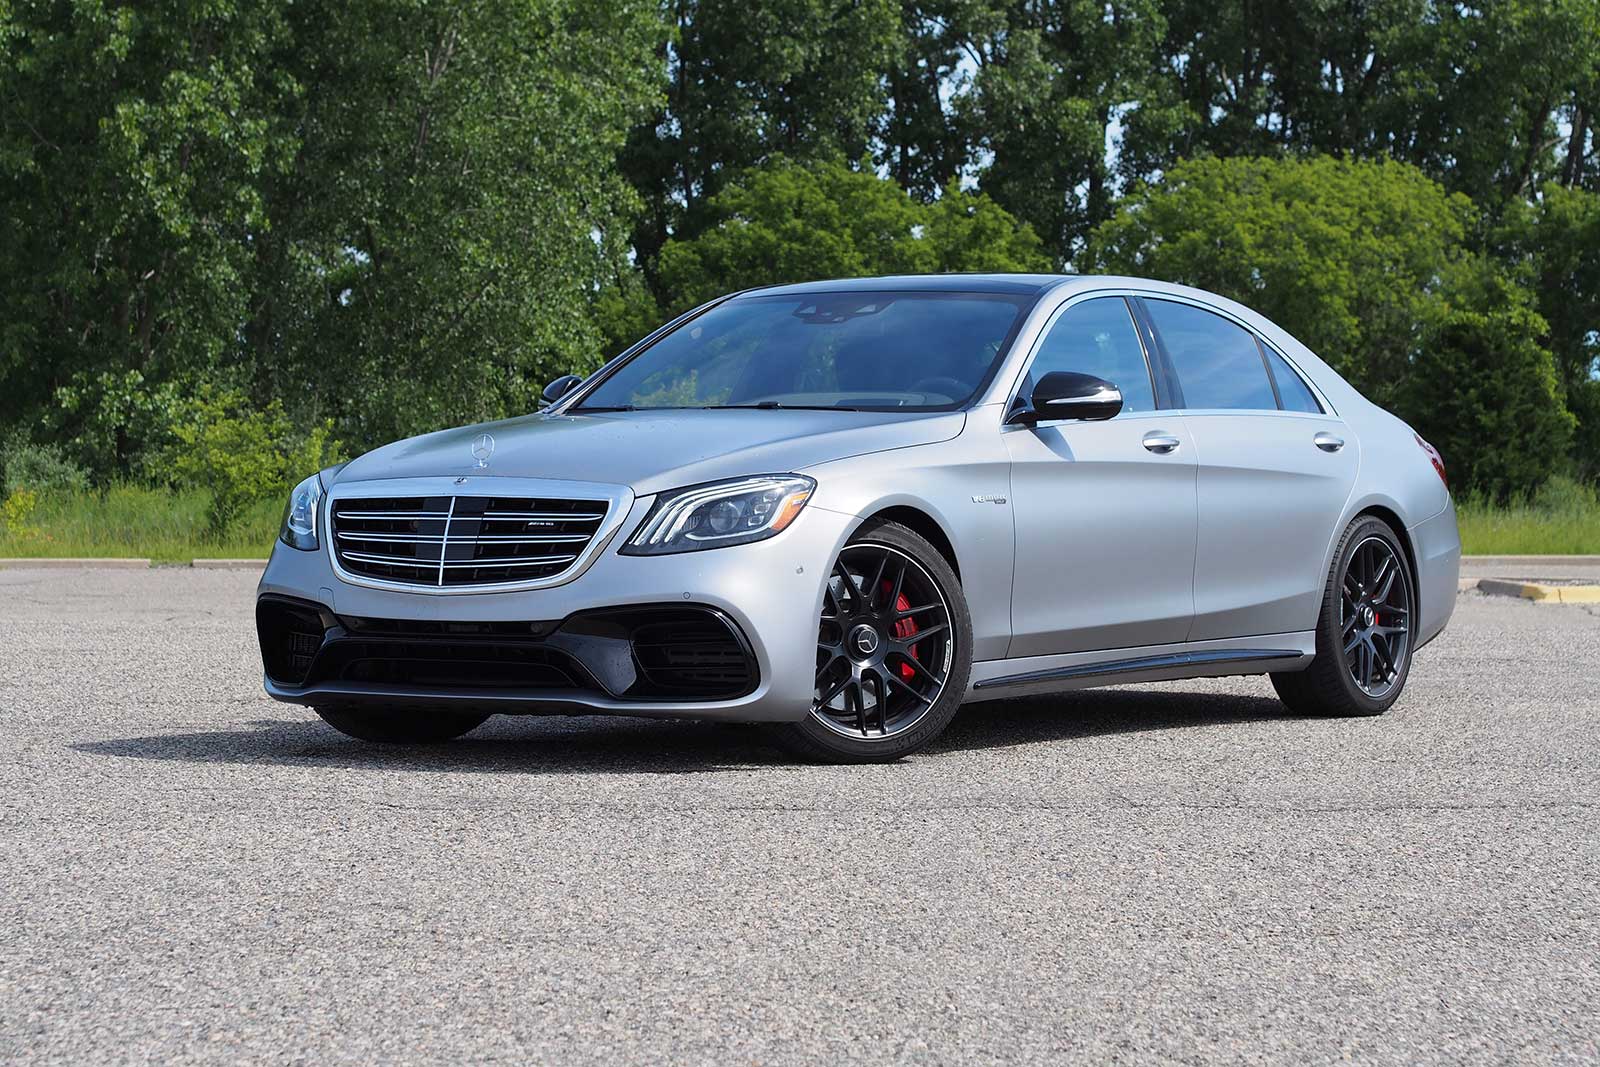 2018 Mercedes-AMG S 63 Review: Curbed with Craig Cole - AutoGuide.com